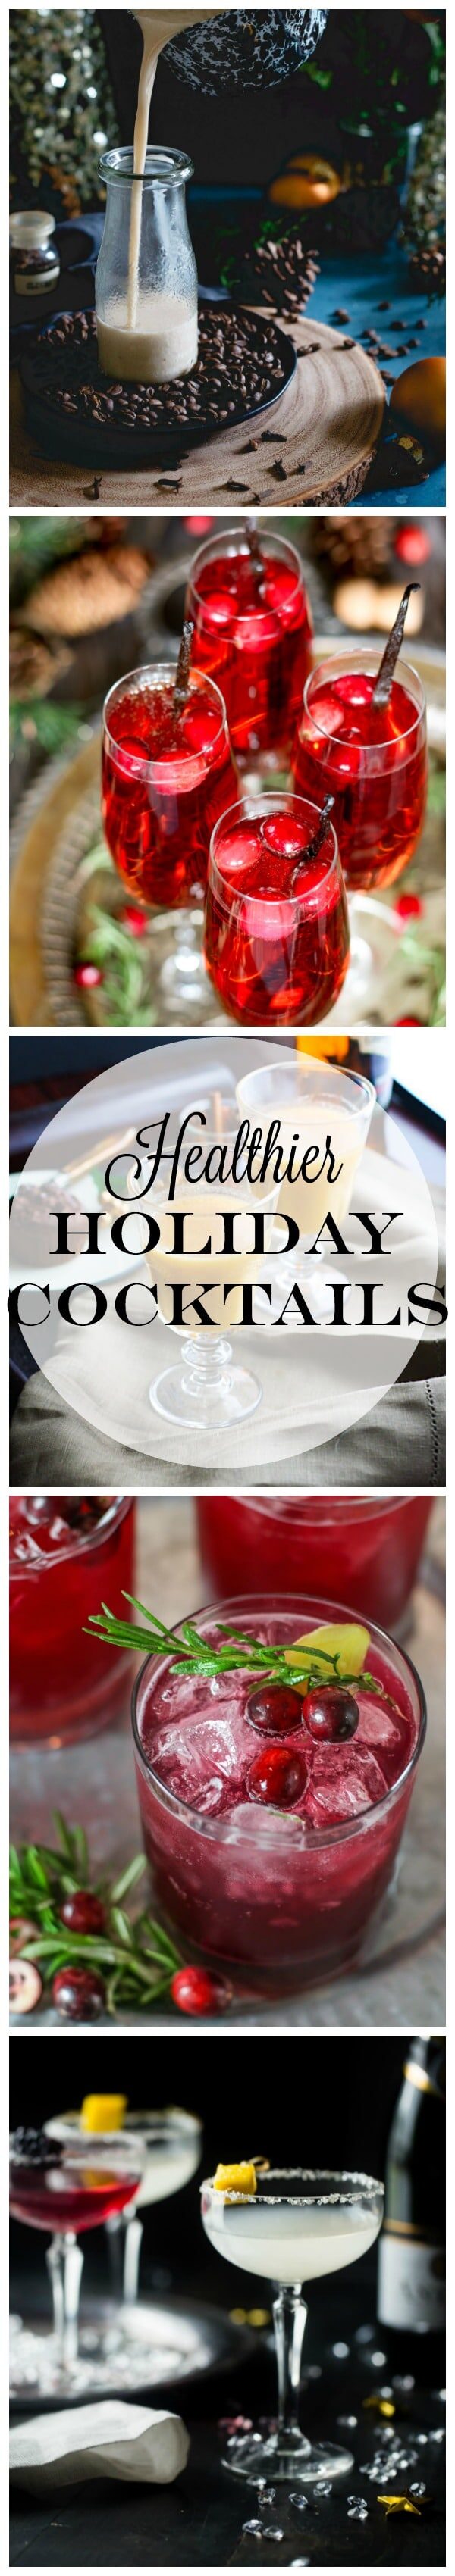 Healthier Holiday Cocktails from Lauren Kelly Nutrition.